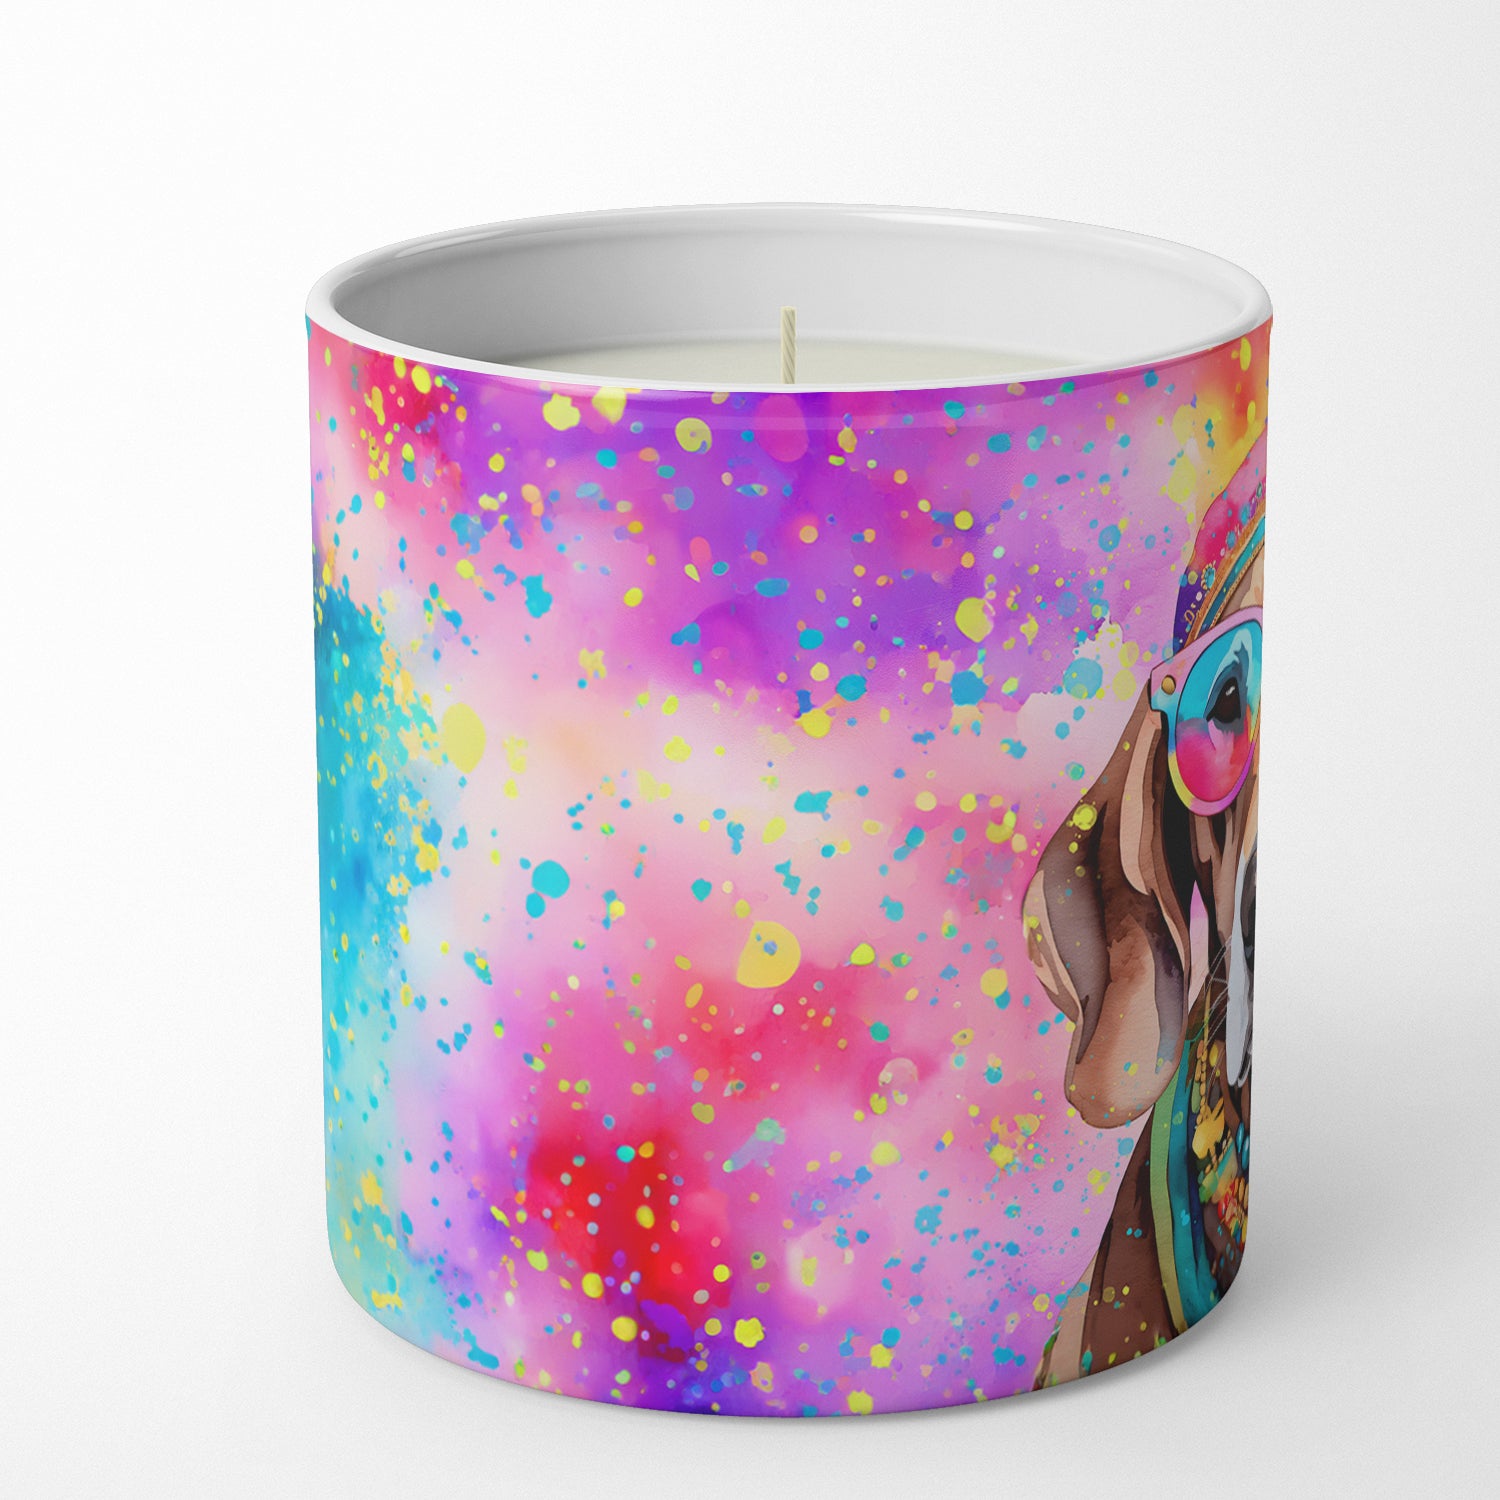 Weimaraner Hippie Dawg Decorative Soy Candle